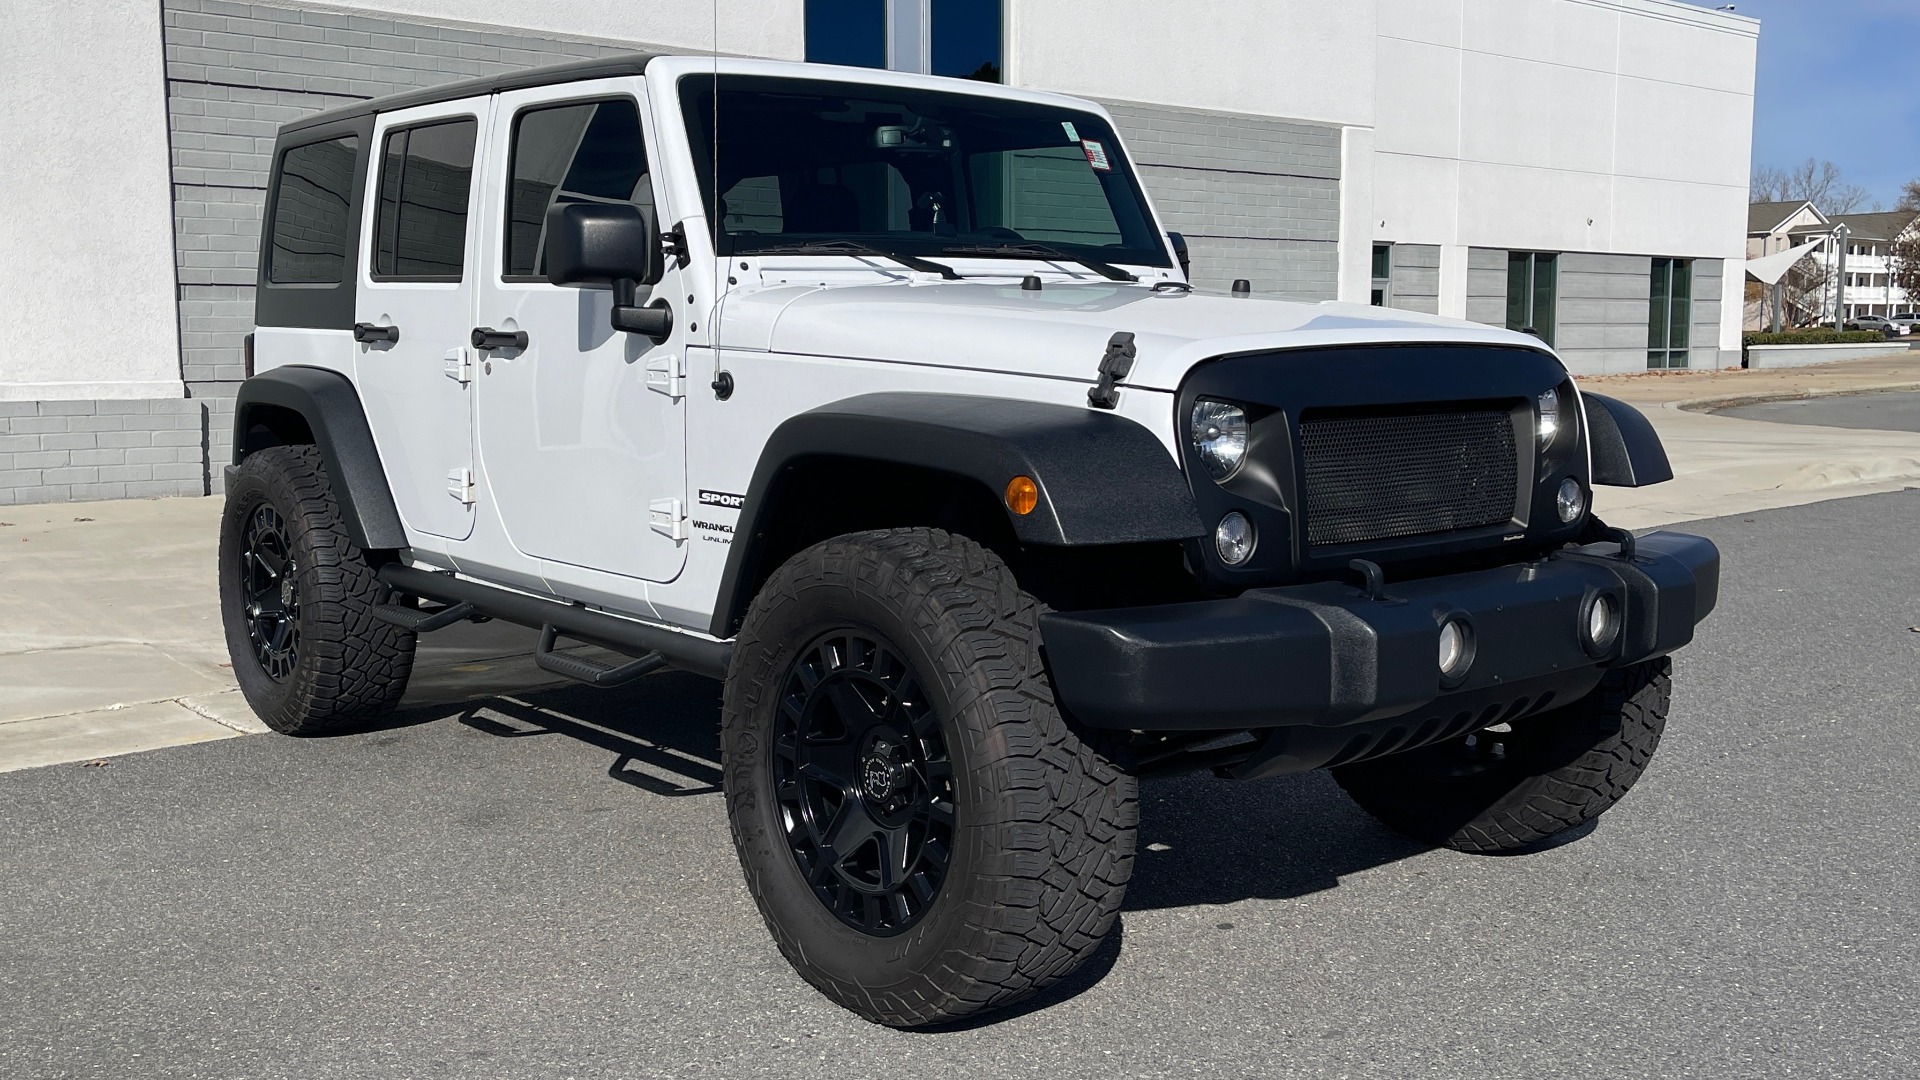 Used 2018 Jeep WRANGLER JK UNLIMITED SPORT S 4X4 / 3.6L V6 / AUTO / HARD-TOP / 20IN WHEELS for sale Sold at Formula Imports in Charlotte NC 28227 10